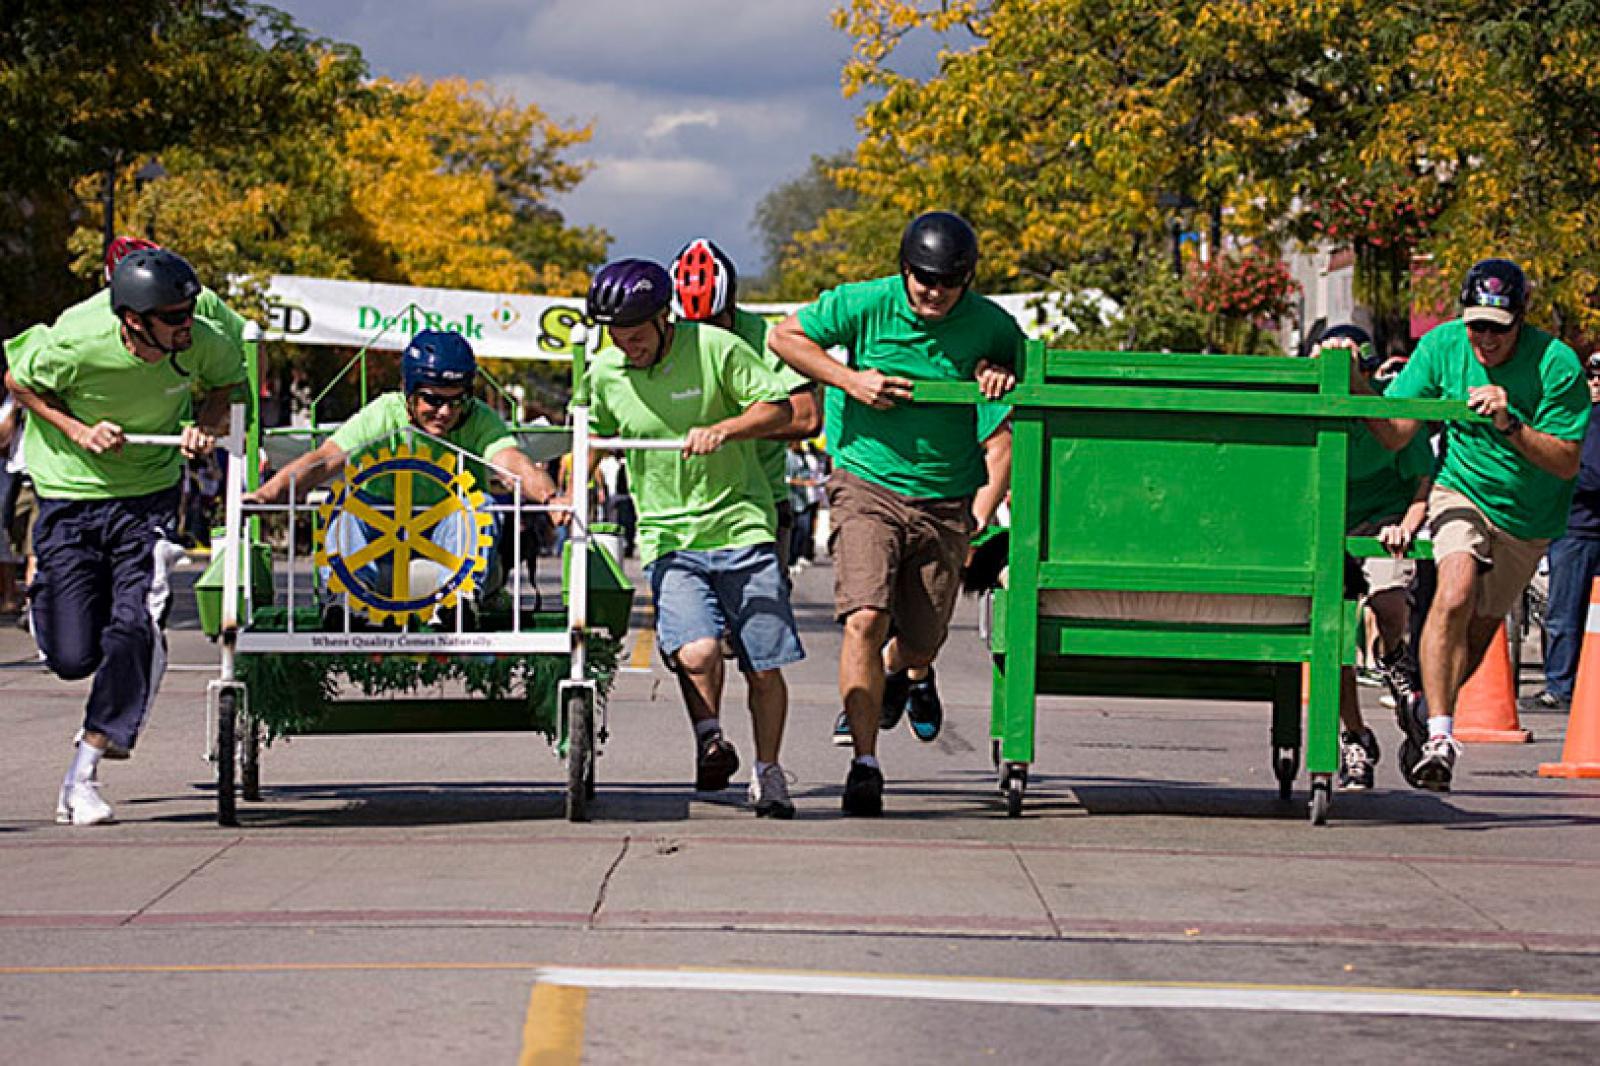 Landscapers compete in Amazing Bed Race.